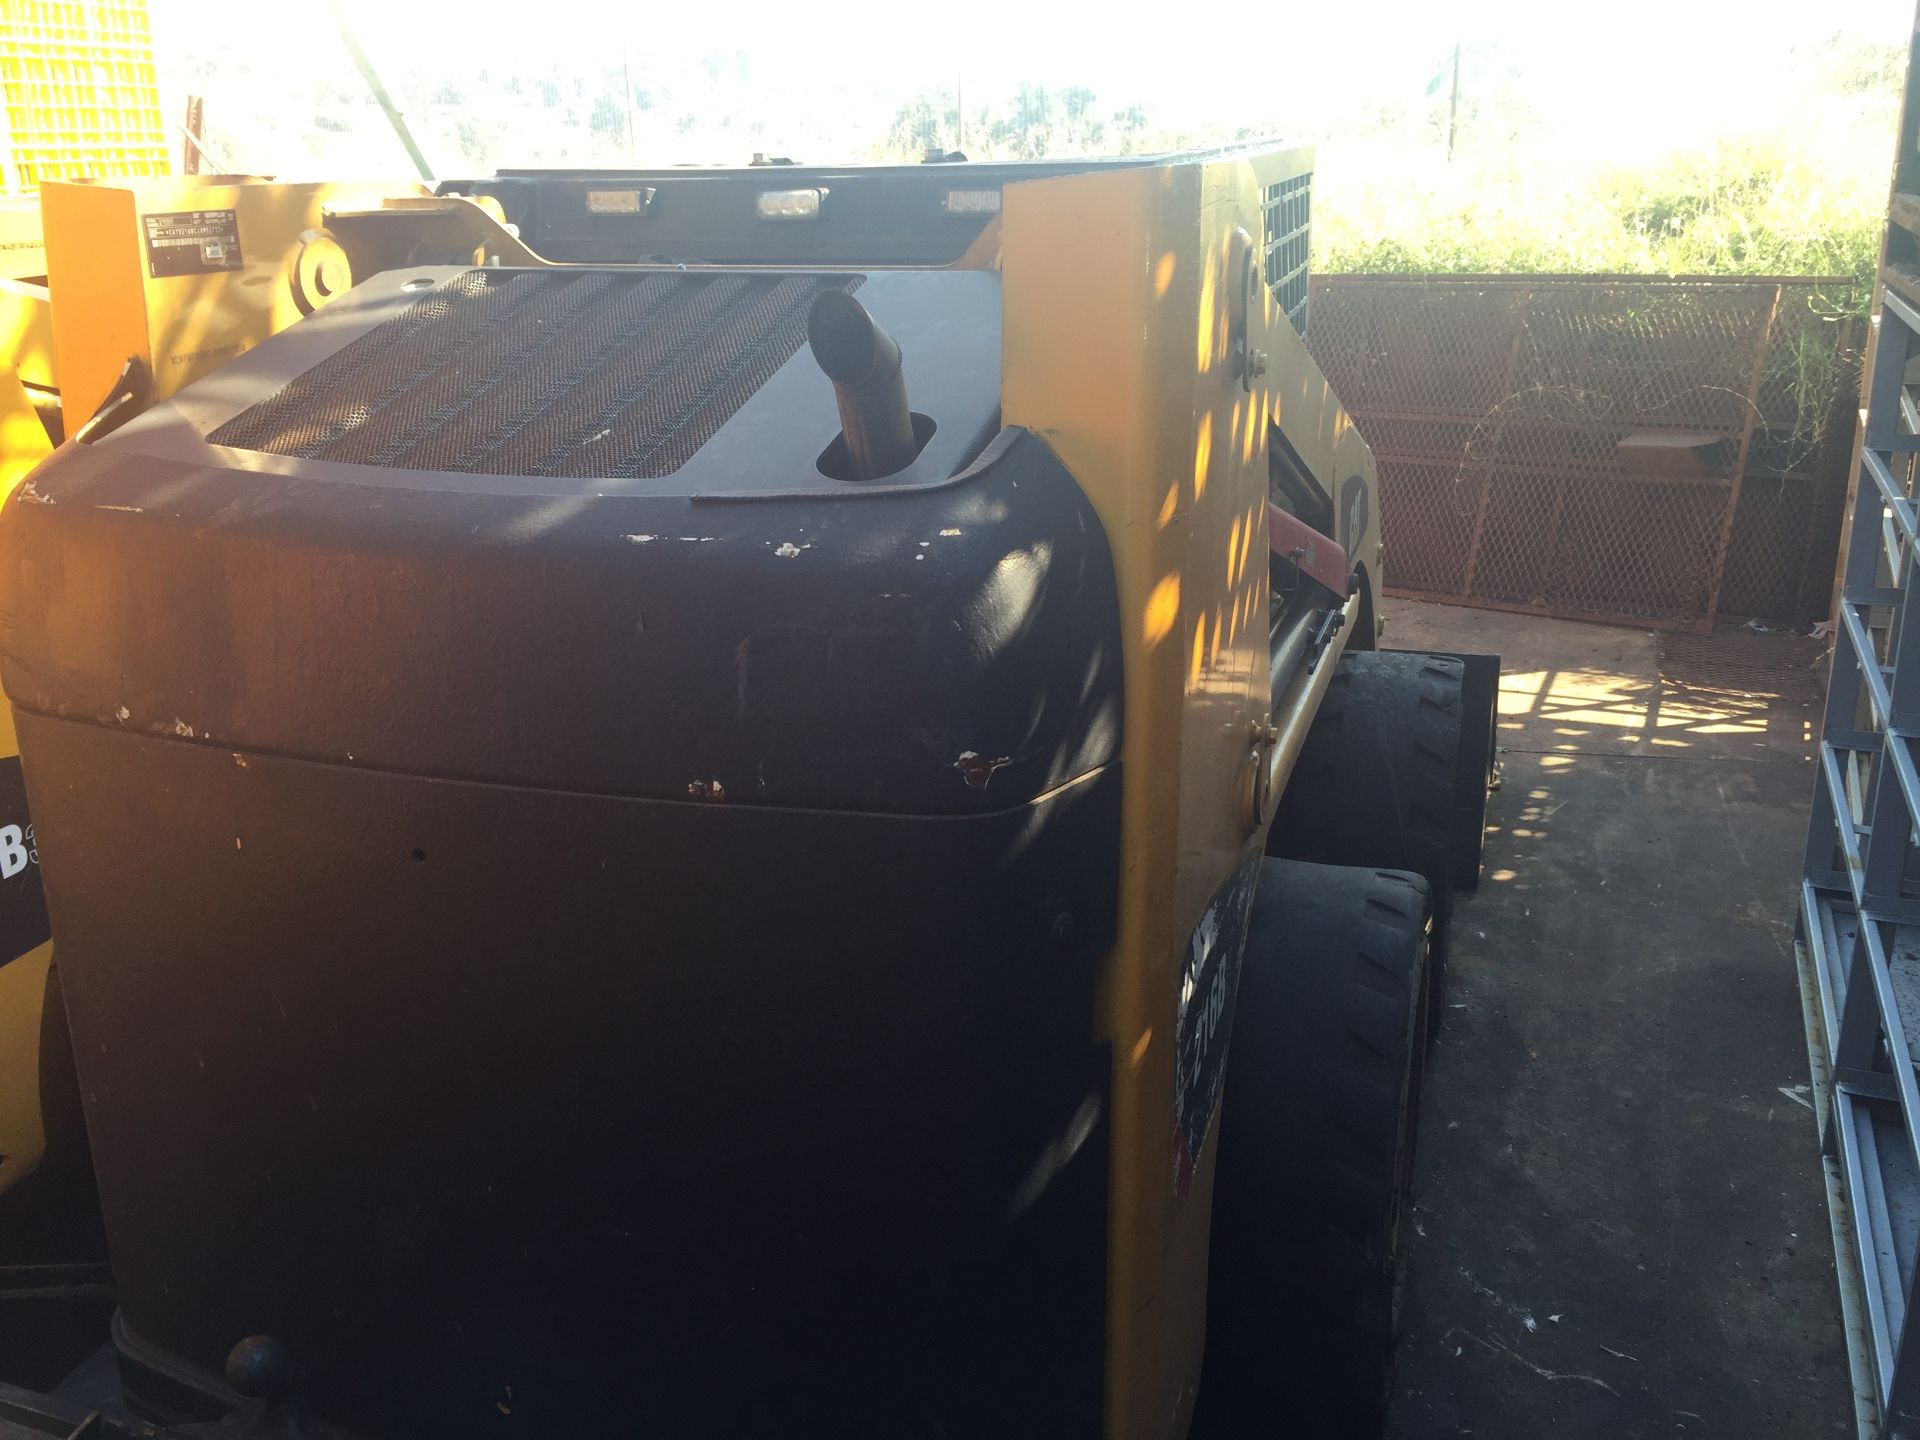 2008 CAT 218B SKIDSTEER CAT021BCJXM02735 - (23130) - LOCATION HAMMERSDALE - Subject to Confirmation